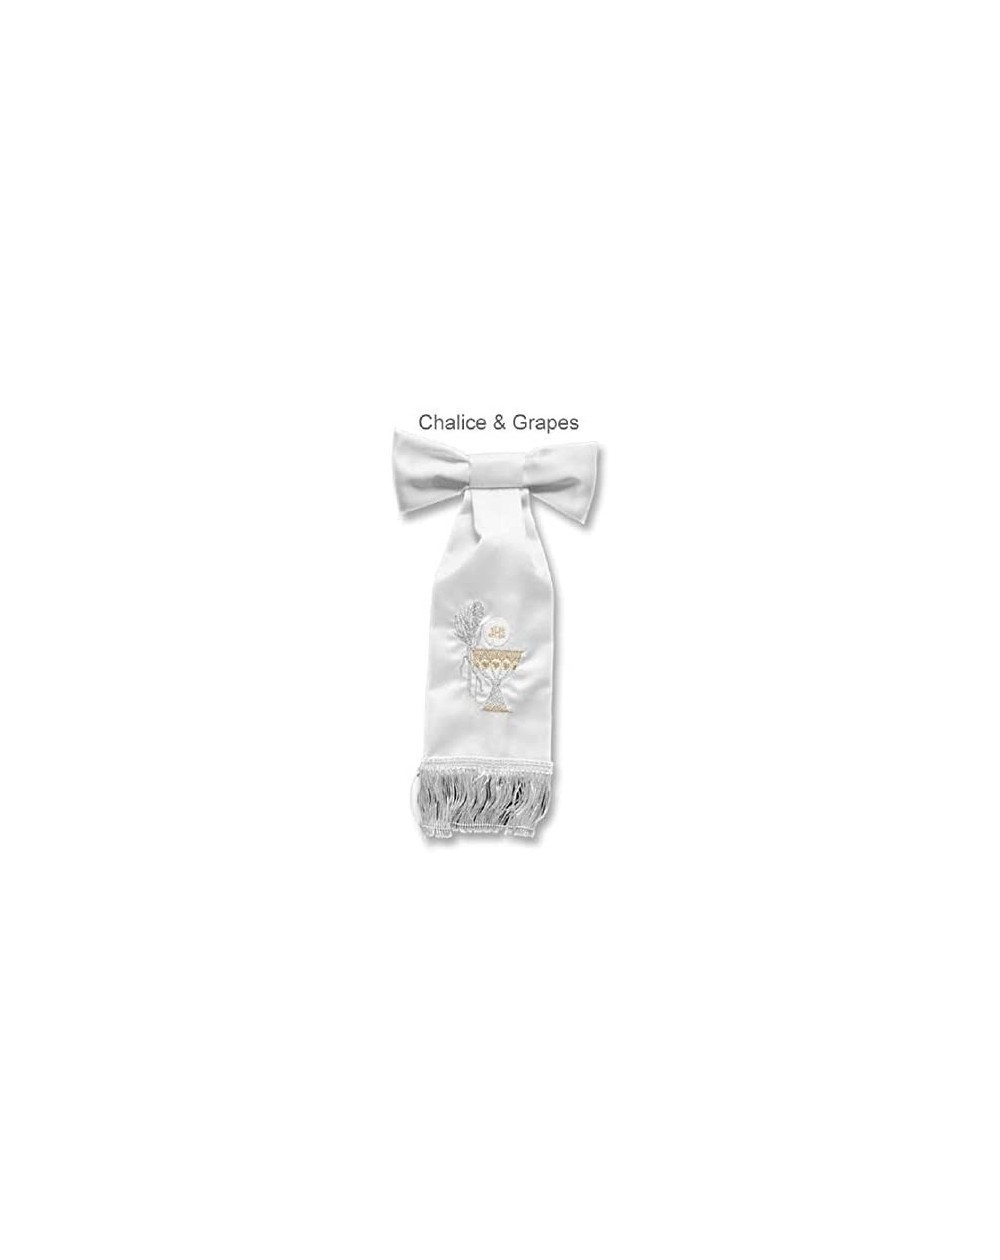 Favors First Holy Communion White Boy Armband with Embroidered Handcrafted Accents Chalice and Host Silver Gold - CZ18SQIQY03...